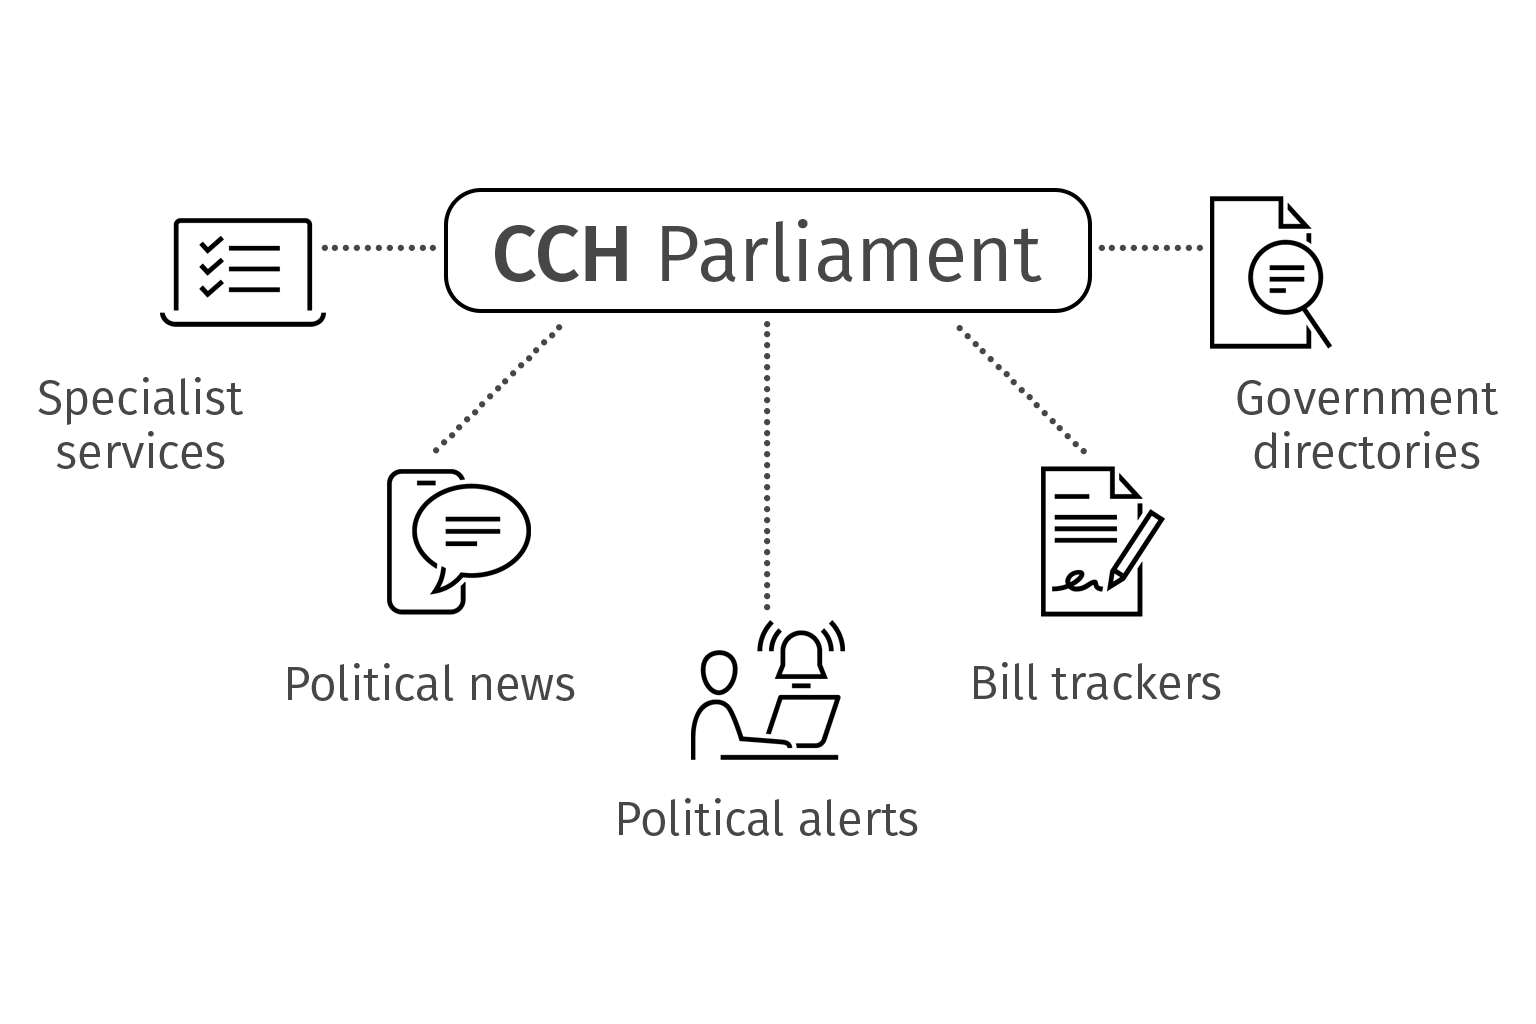 CCH Parliament Intro Graphic